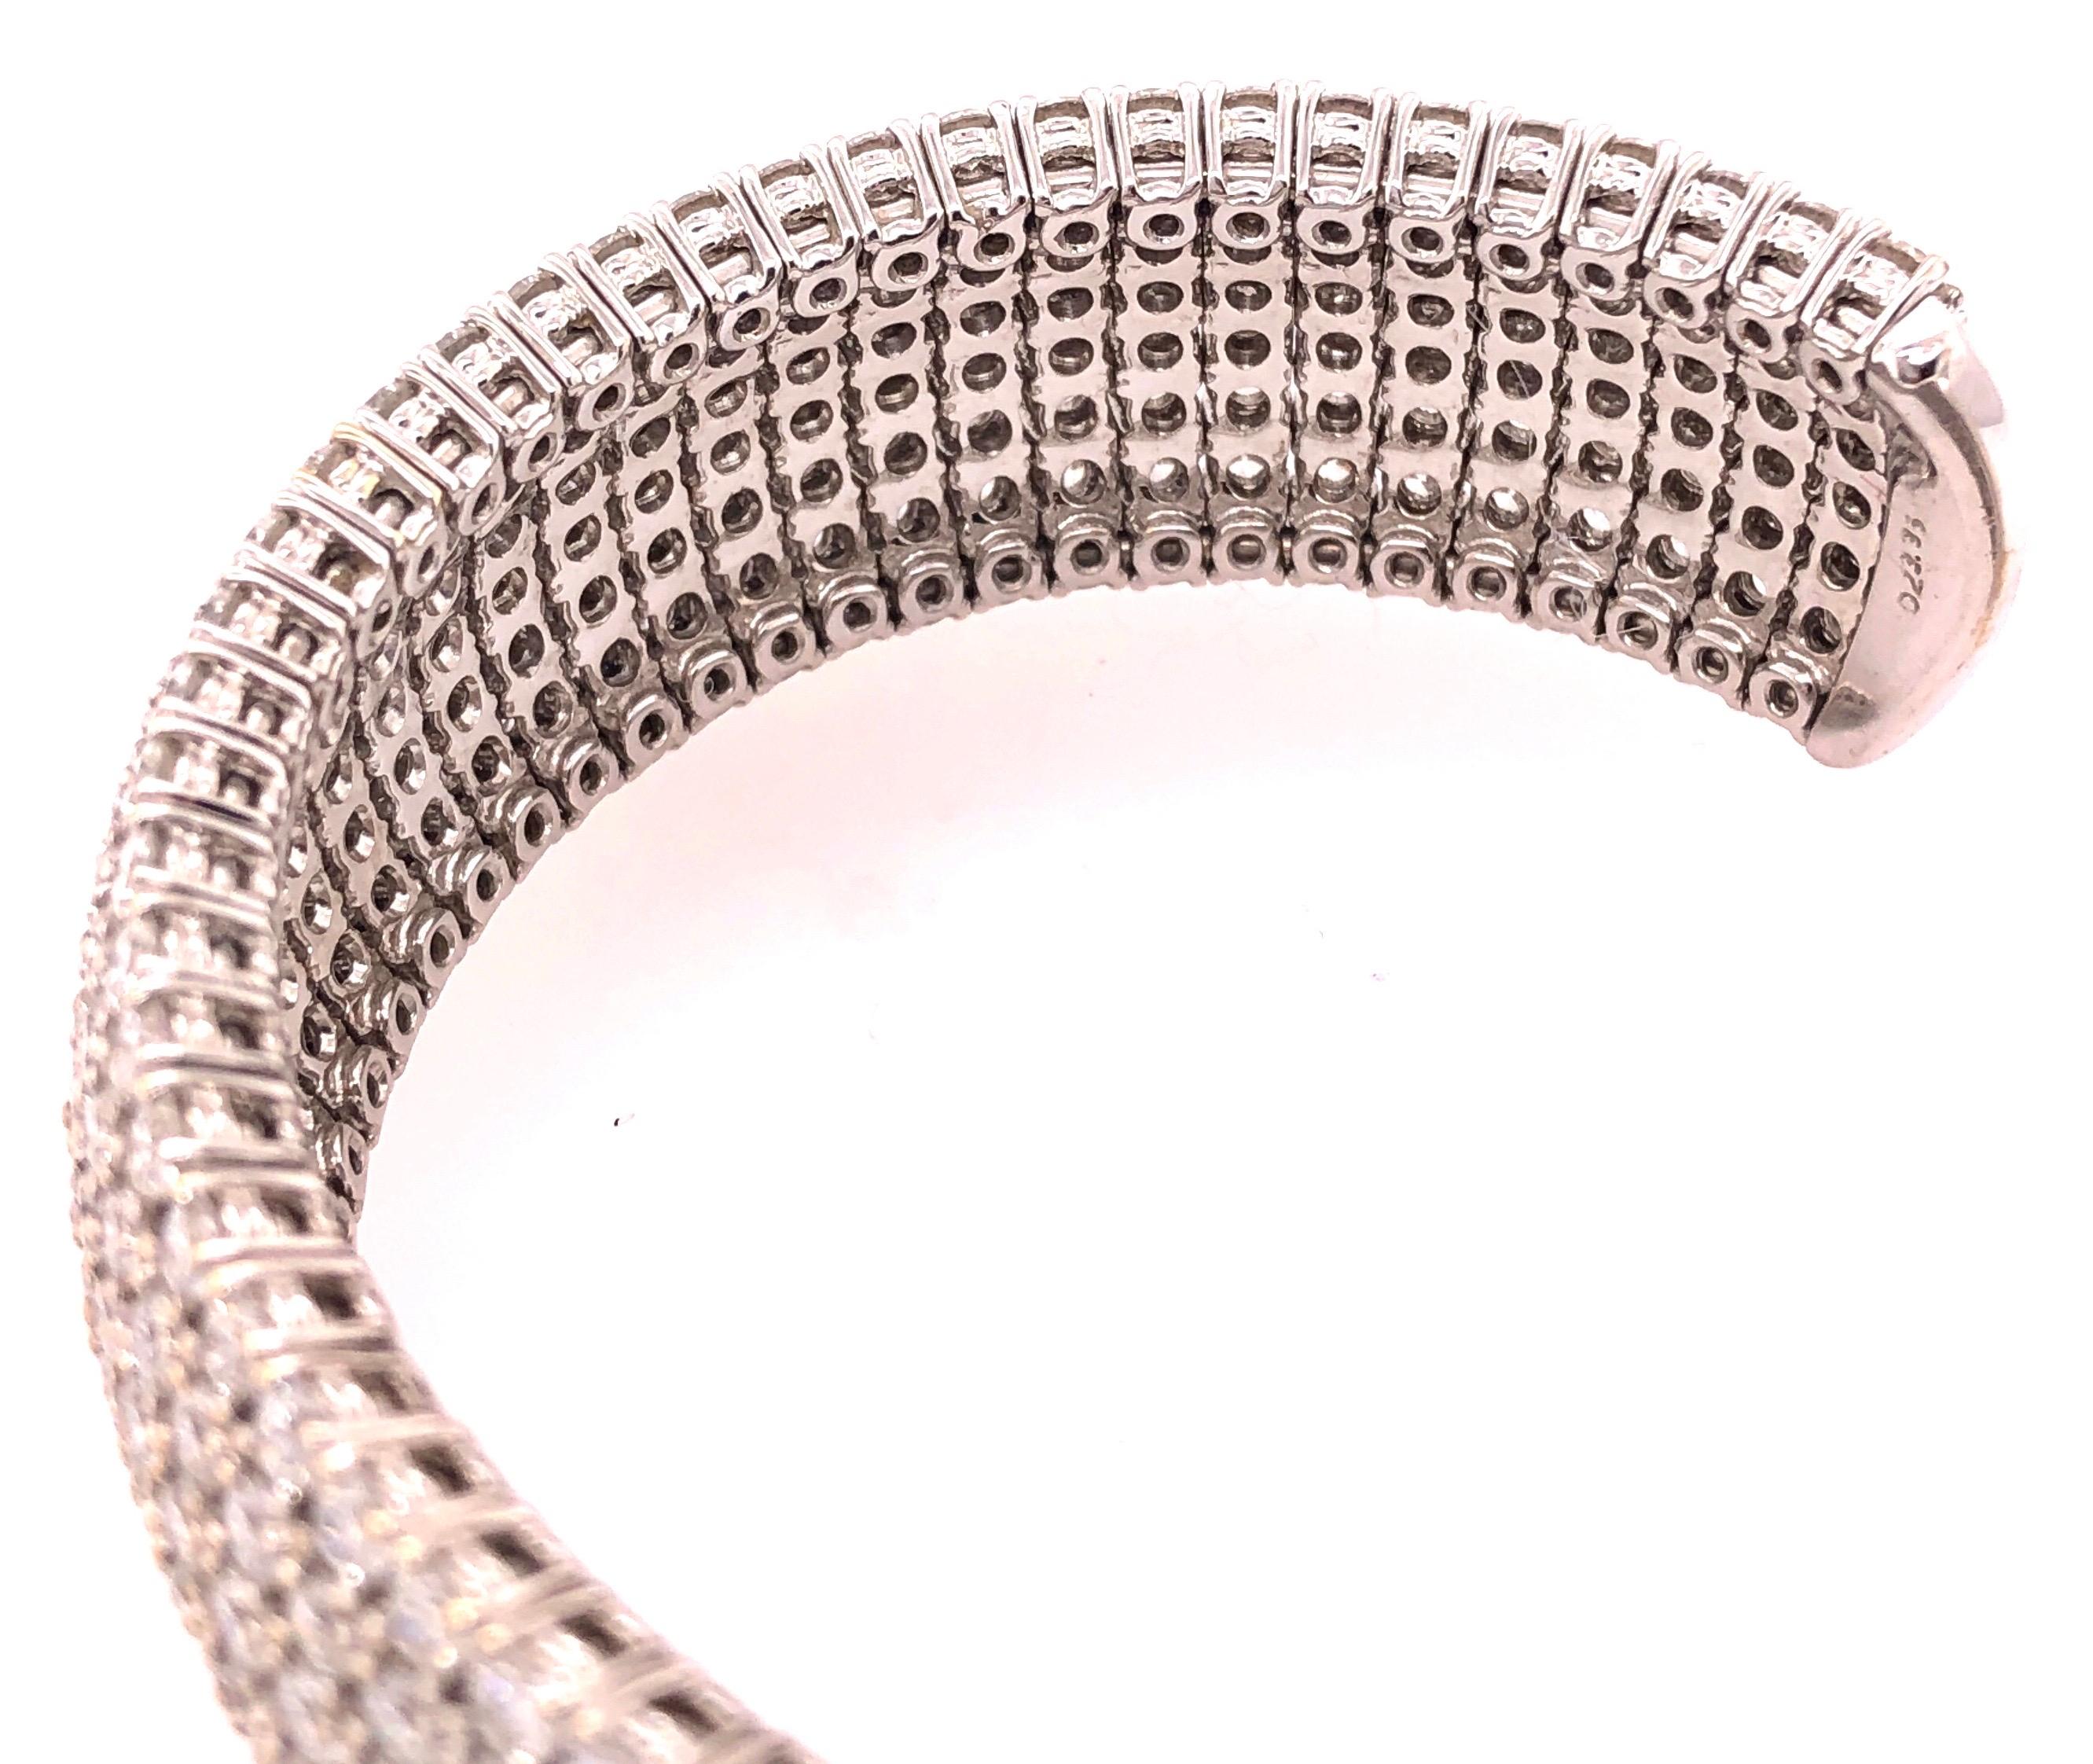 18 Karat White Gold and Diamond Cuff Bracelet Weighing Approx 32.89 Carat For Sale 7